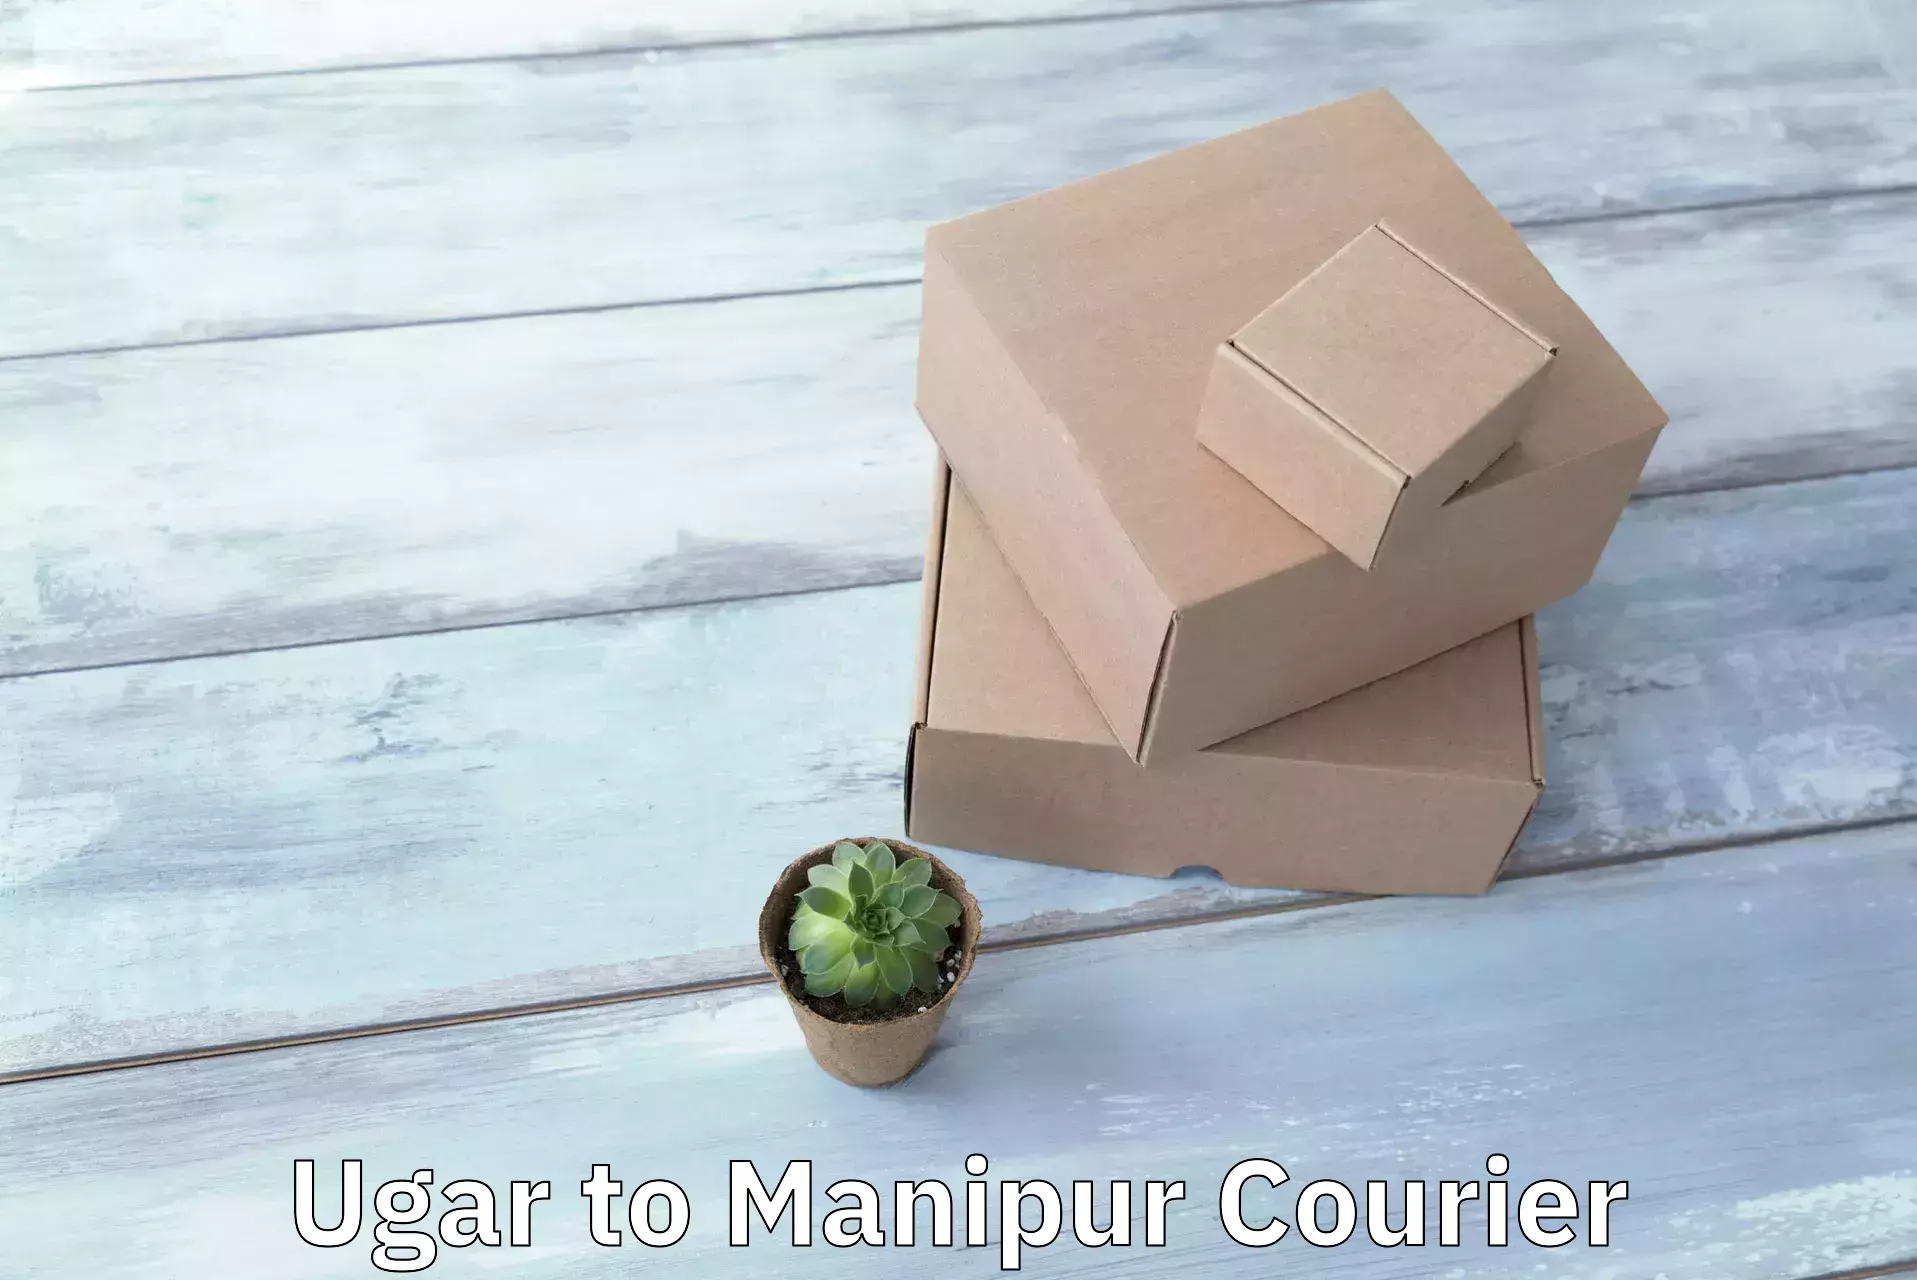 Business shipping needs Ugar to Manipur